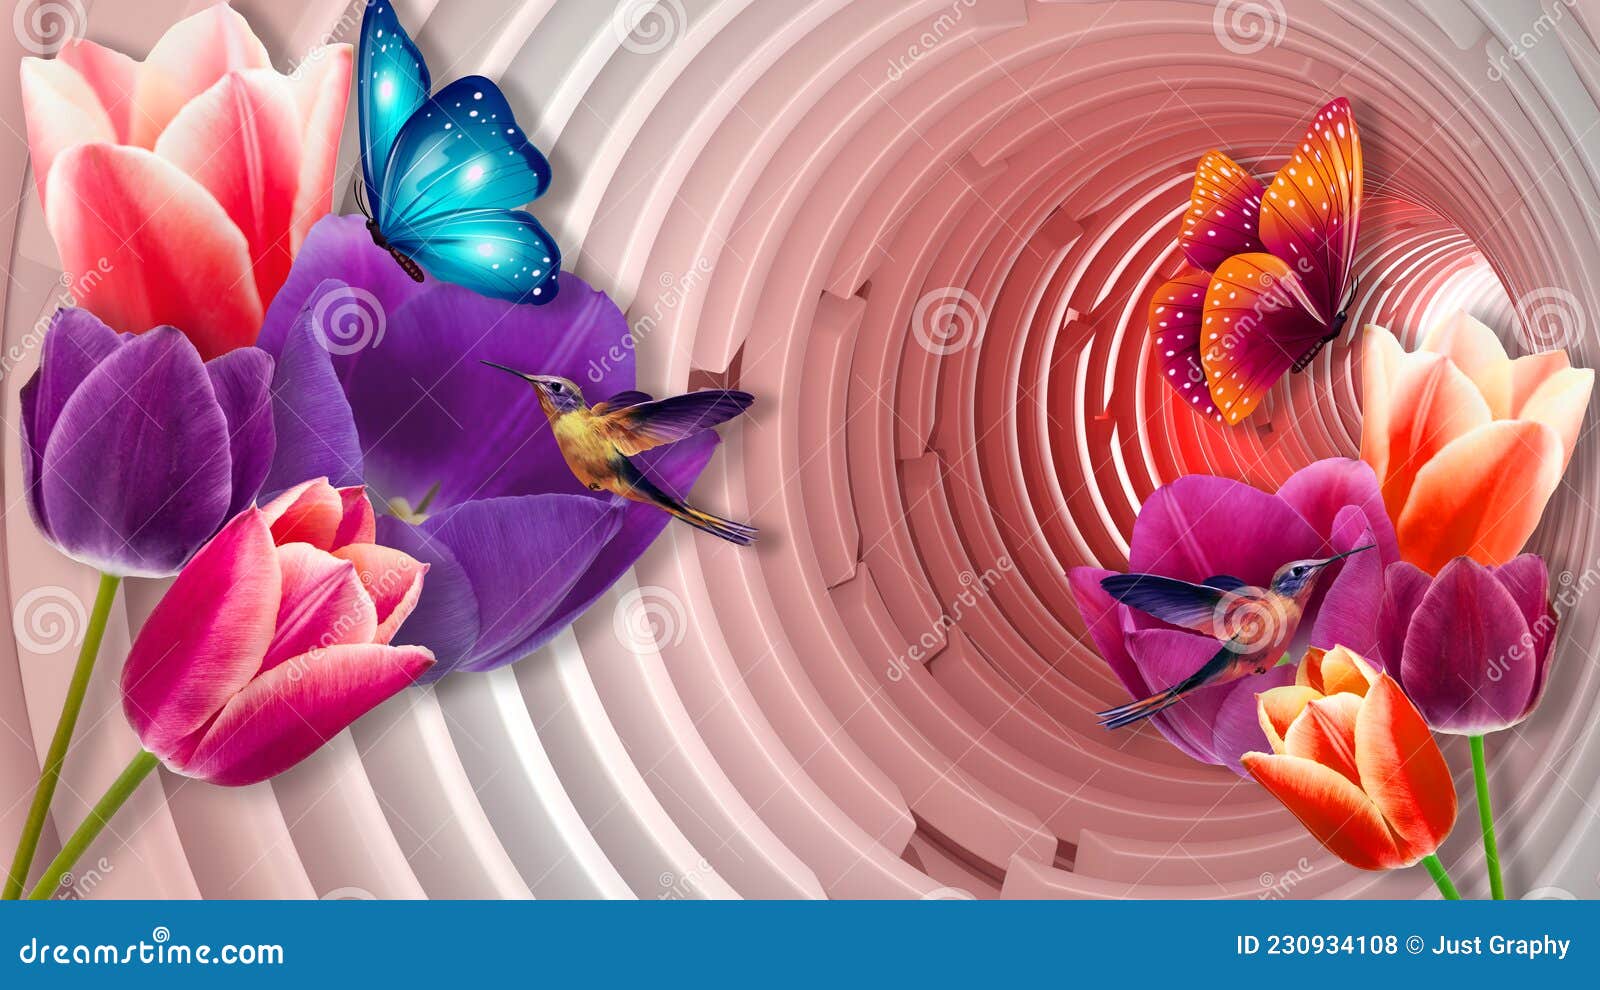 Gold Butterfly 3D Live Wallpaper  free download